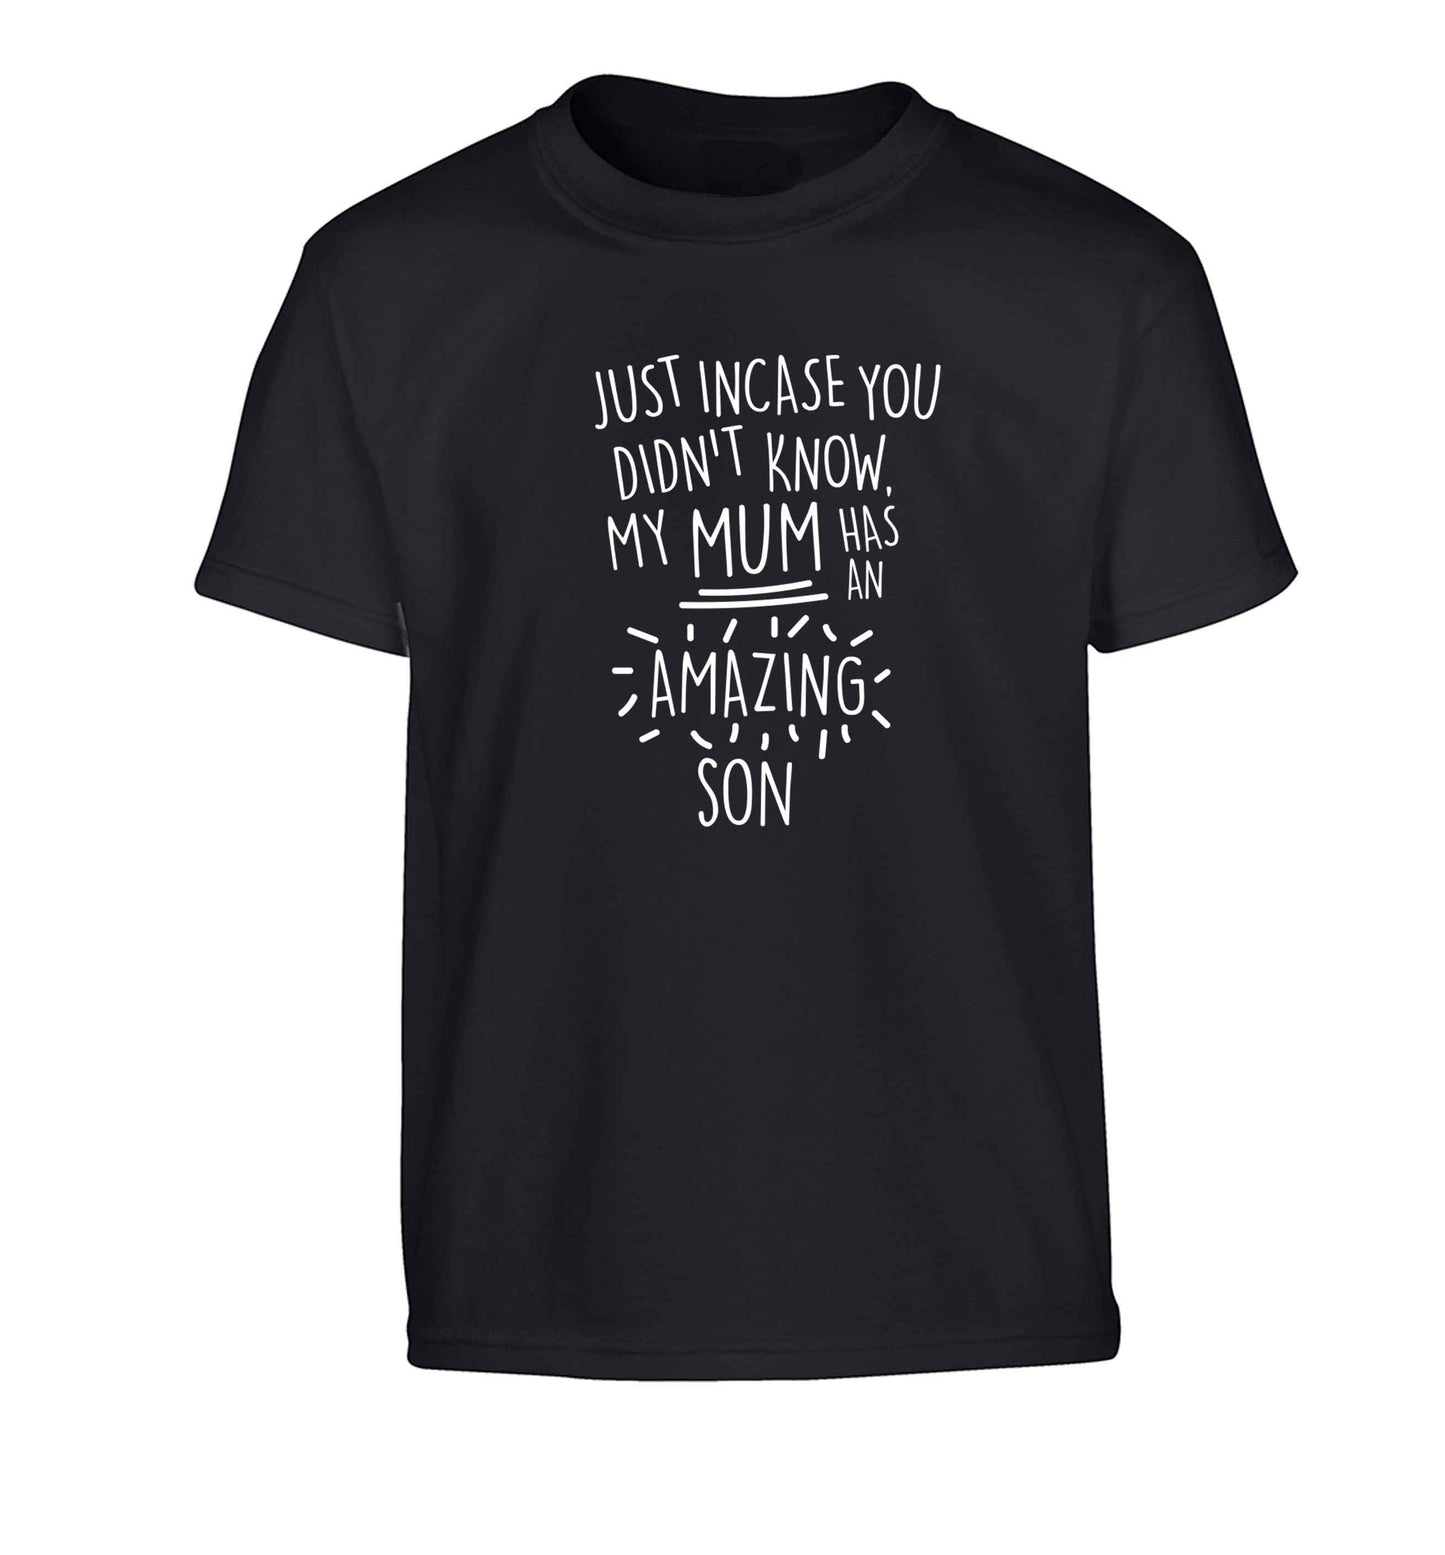 Just incase you didn't know my mum has an amazing son Children's black Tshirt 12-13 Years